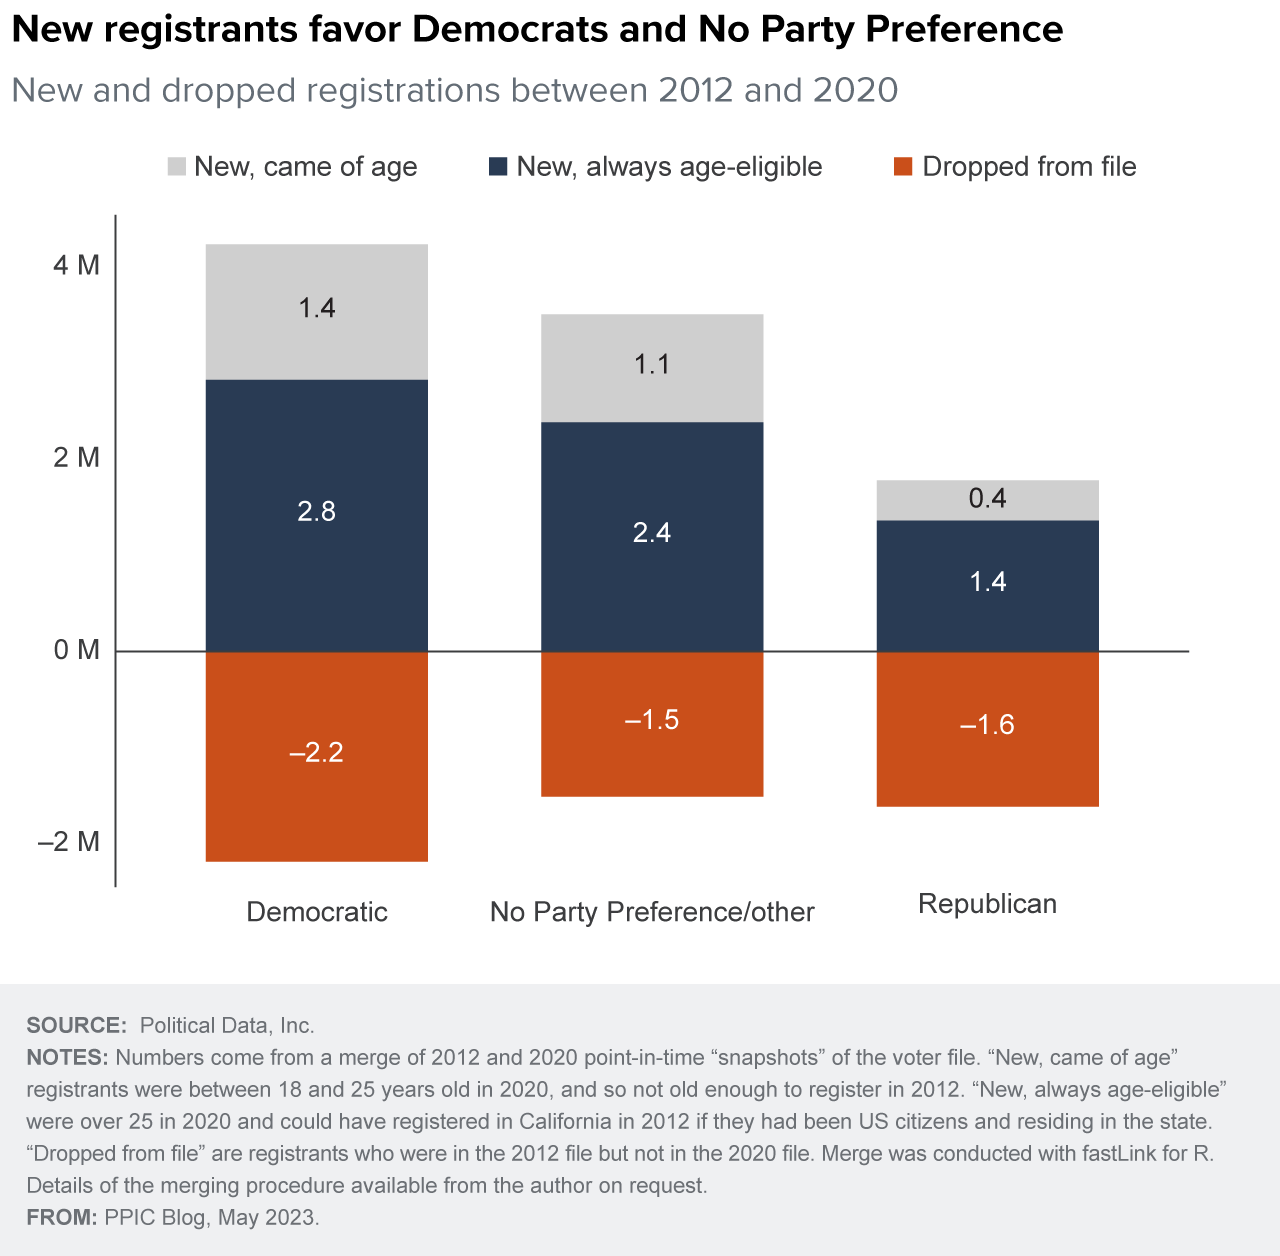 figure - New registrants favor Democrats and No Party Preference